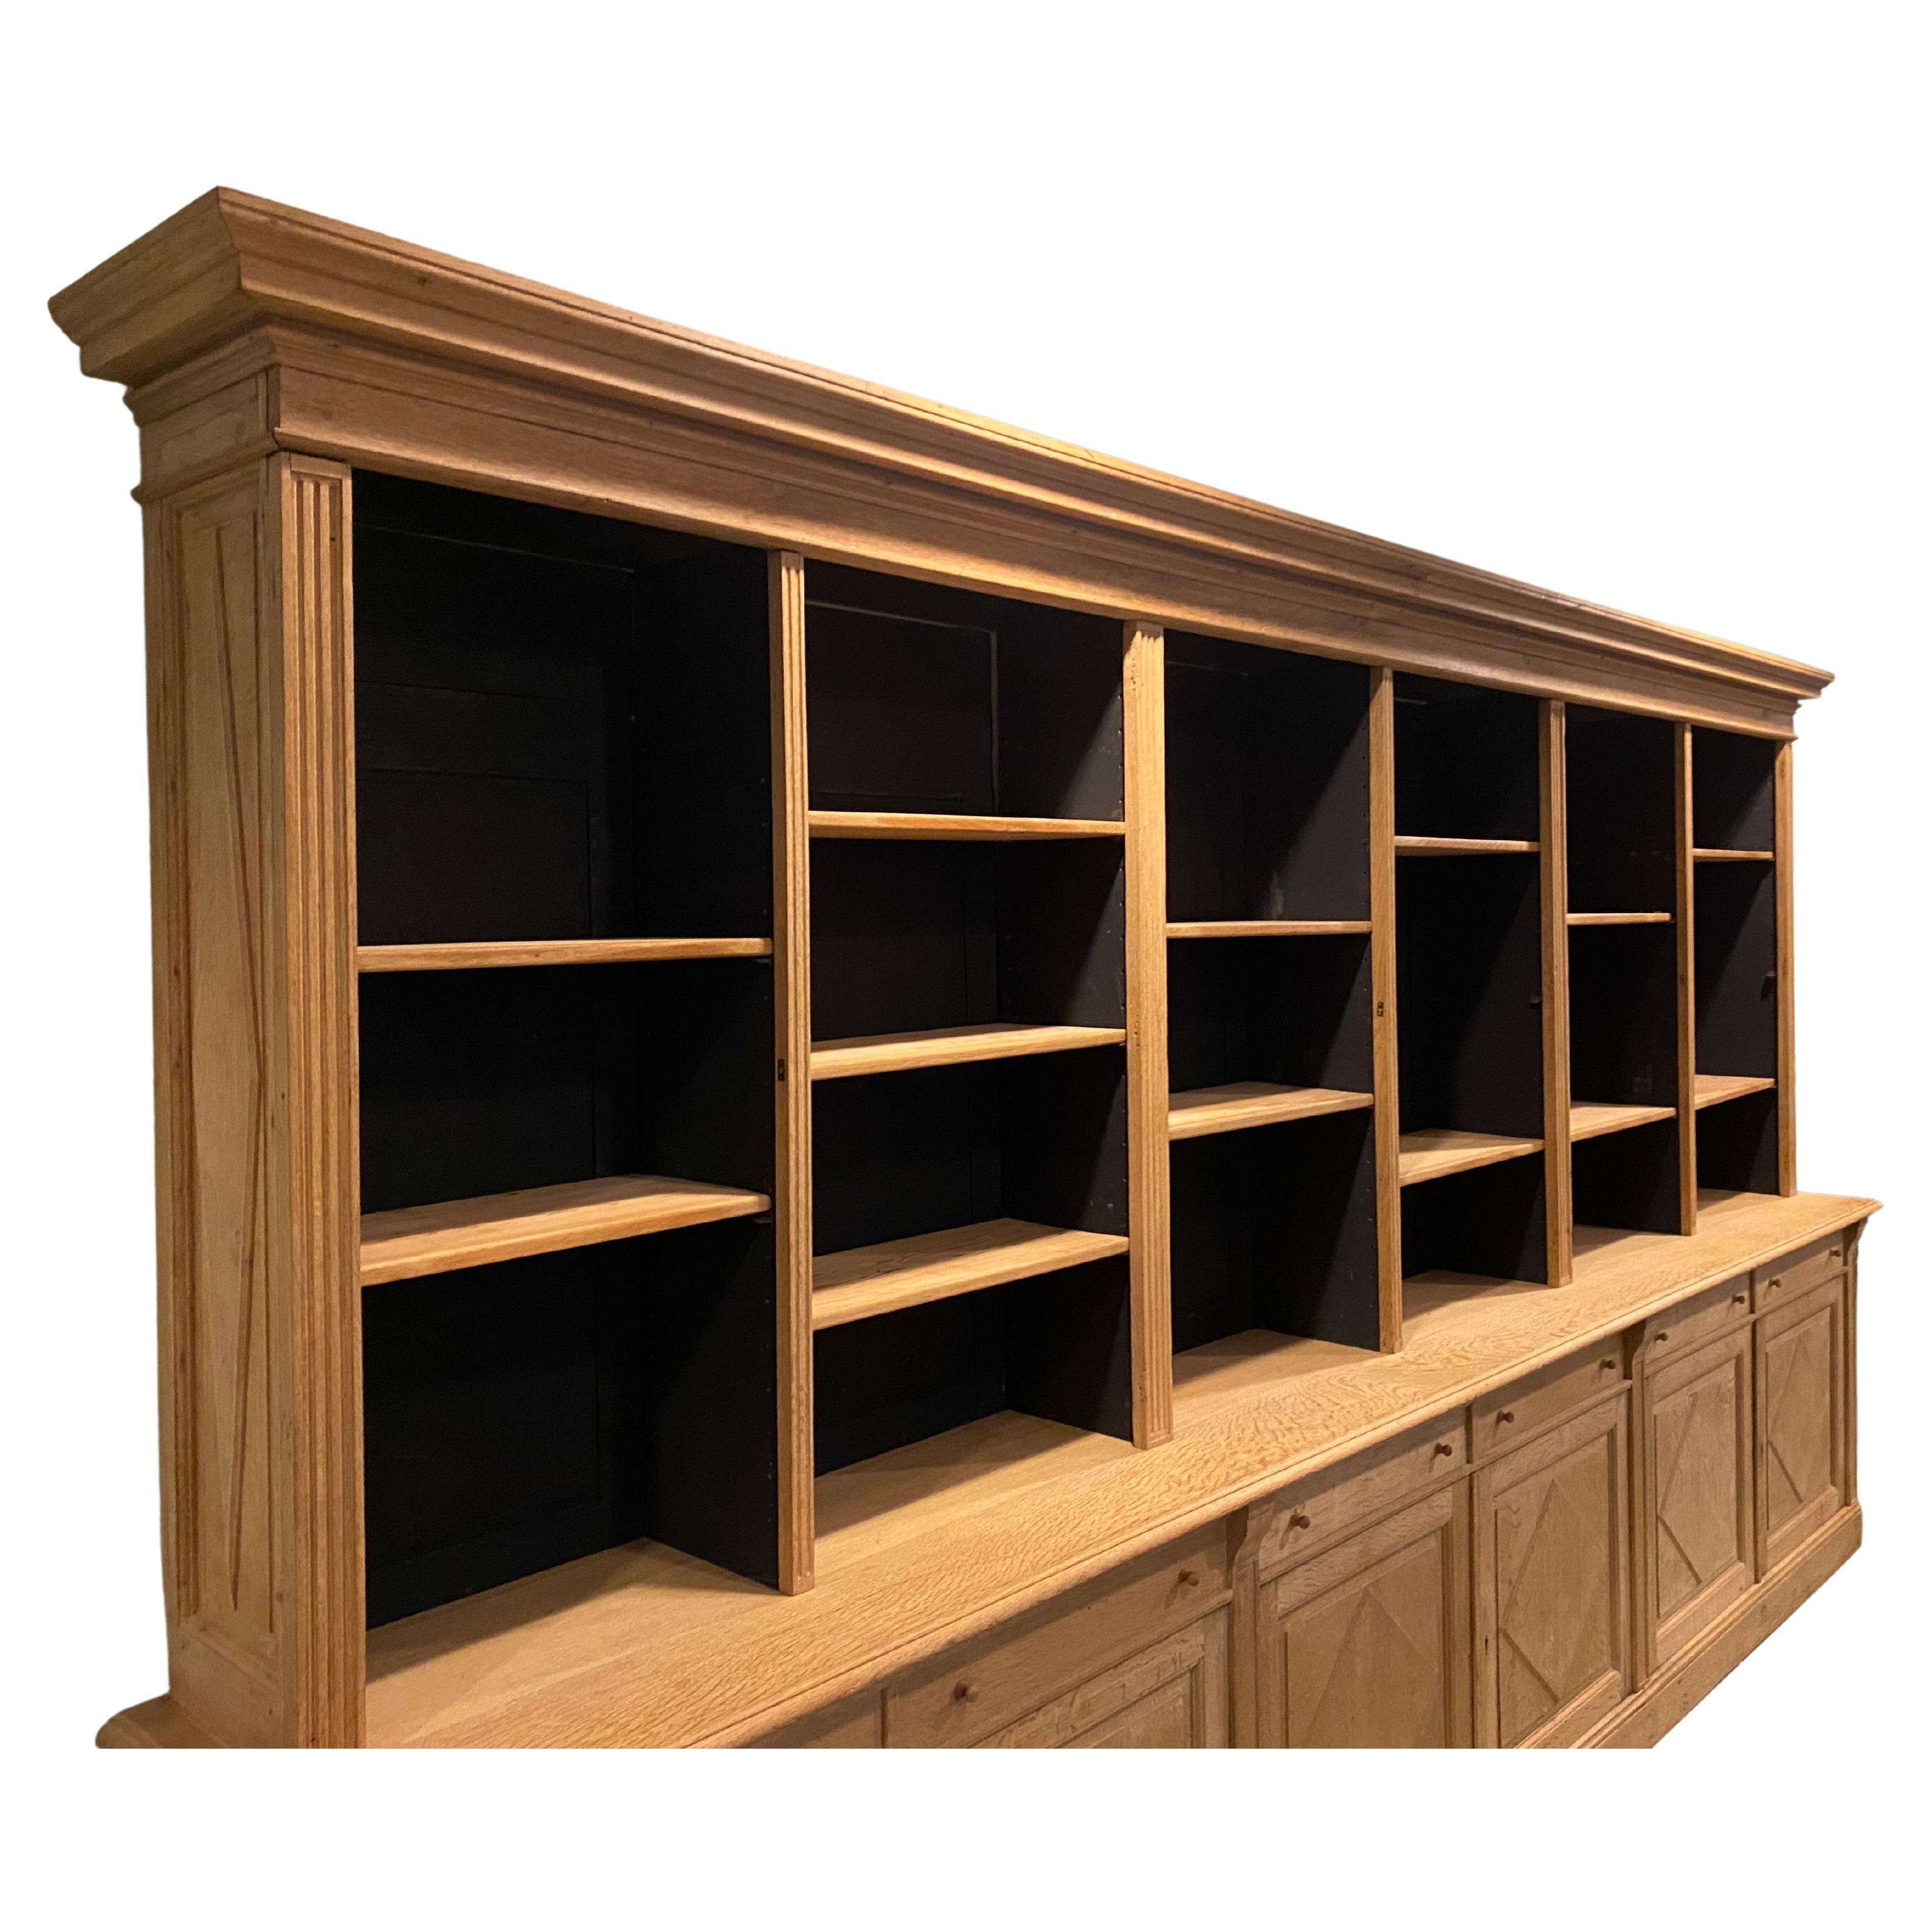 Rustic Antique Blond Oak Bookcase with Glazed Doors